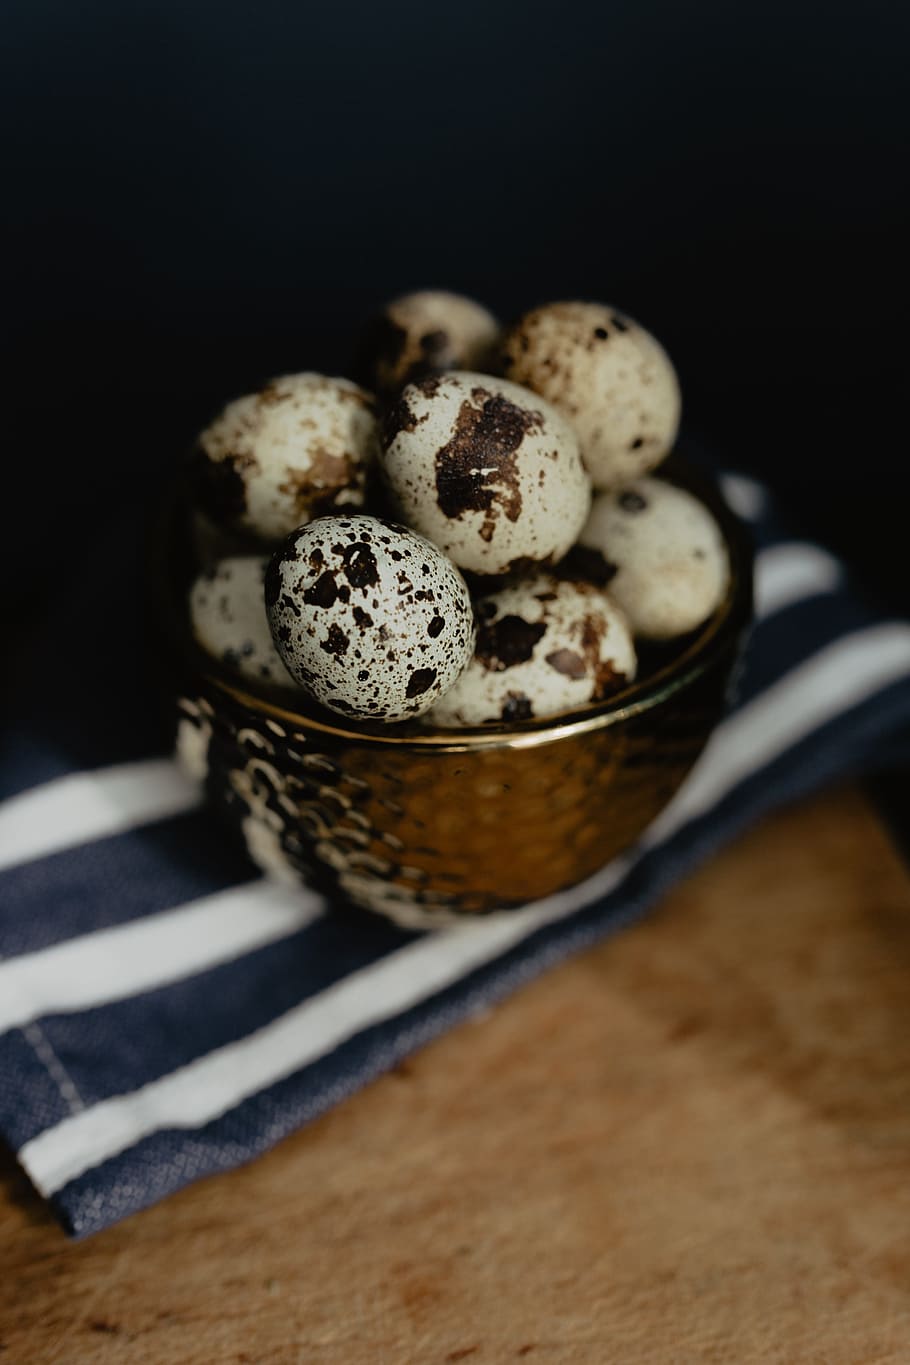 quail eggs, food, eggs, easter, quail, still life, food and drink, indoors, freshness, close-up